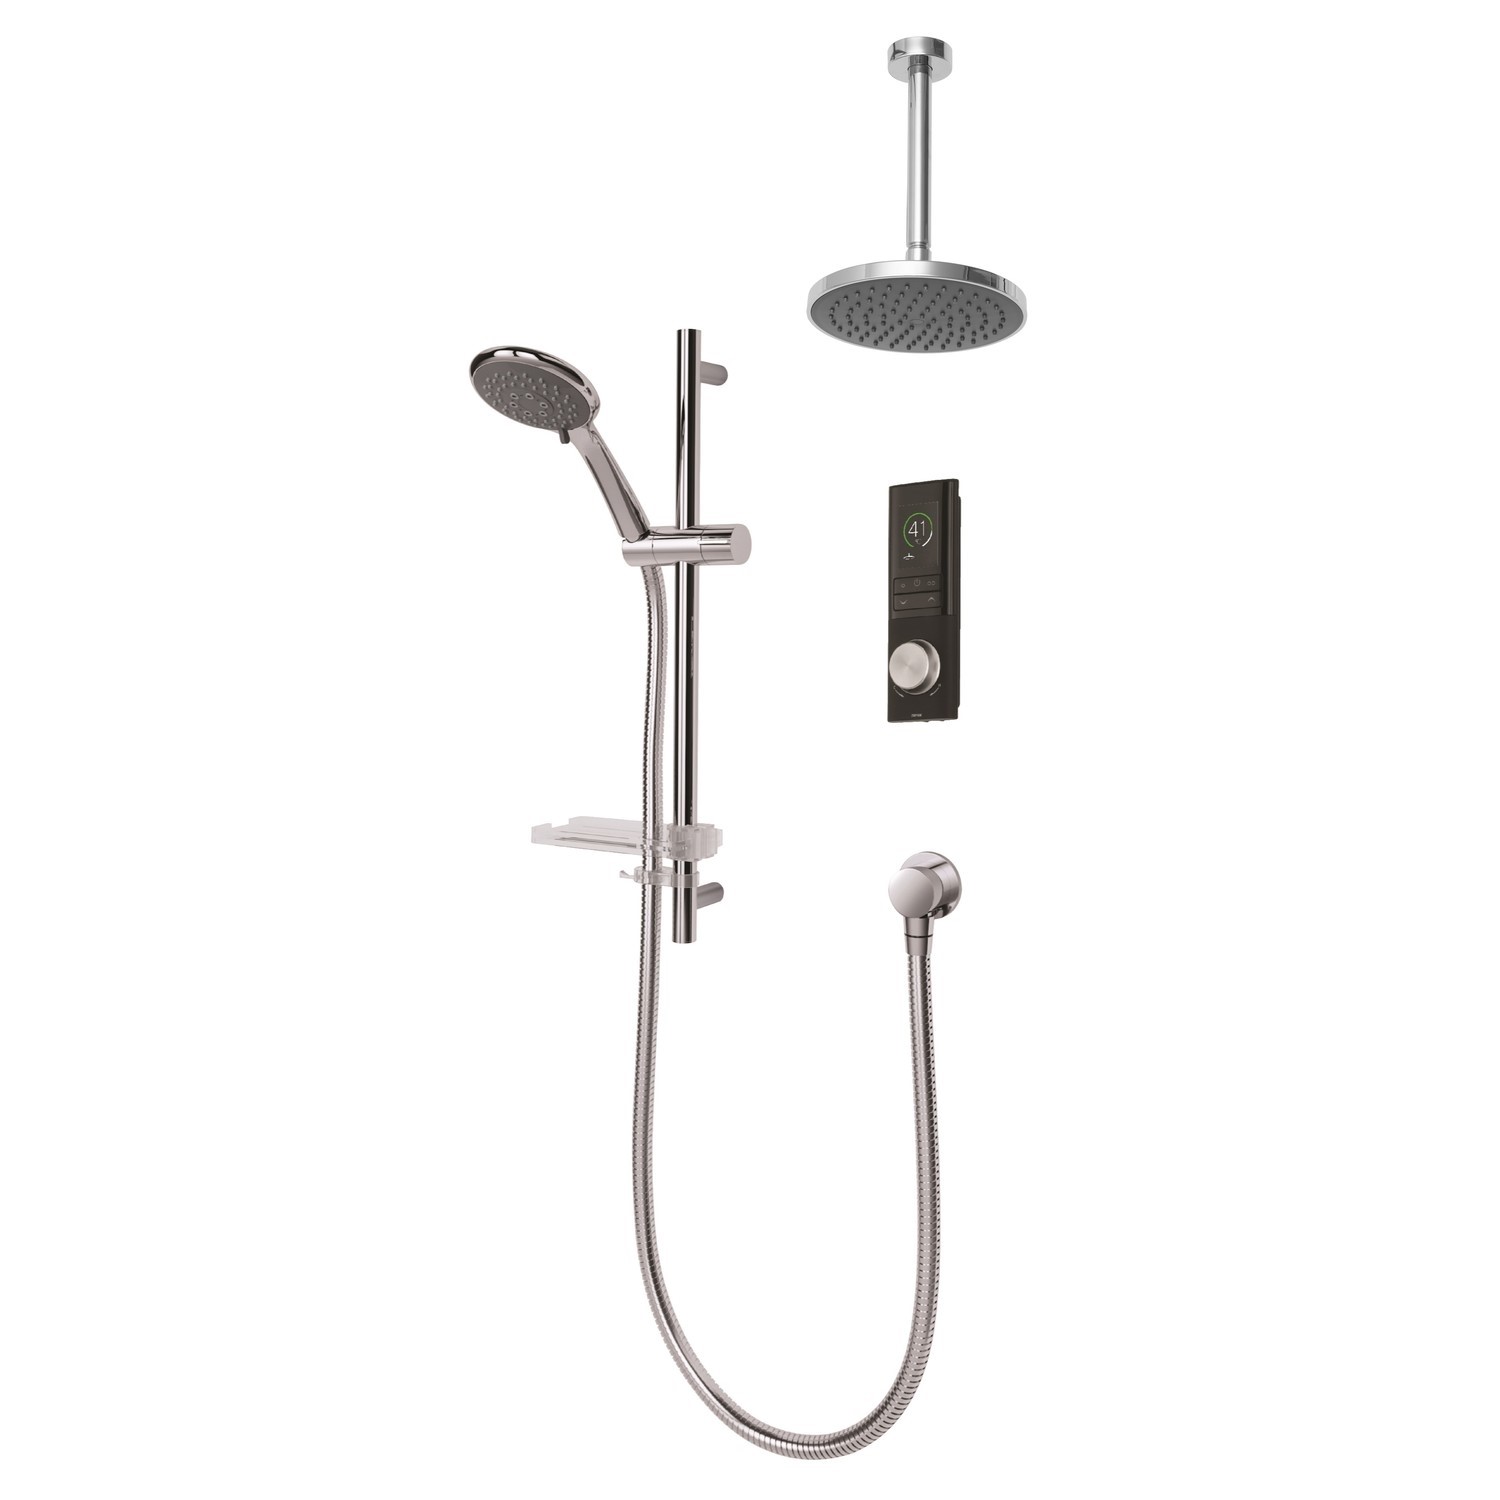 Triton Home Digital Mixer Shower with Round Ceiling Overhead - Unpumped